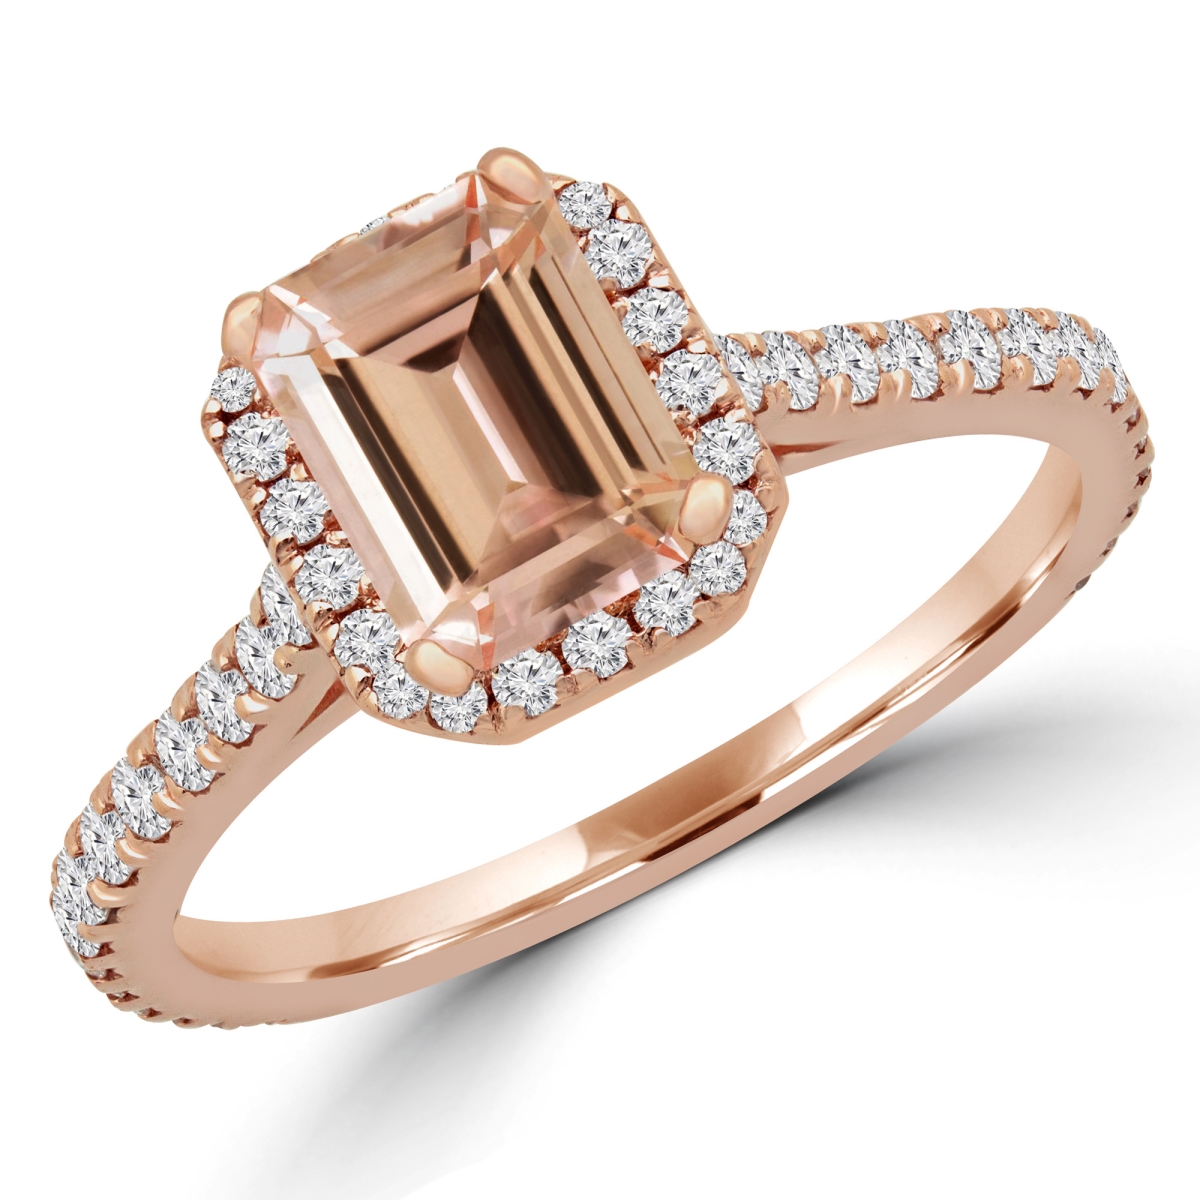 Picture of Majesty Diamonds MD180580-P 1.25 CTW Emerald Pink Morganite Halo Engagement Ring in 14K Rose Gold